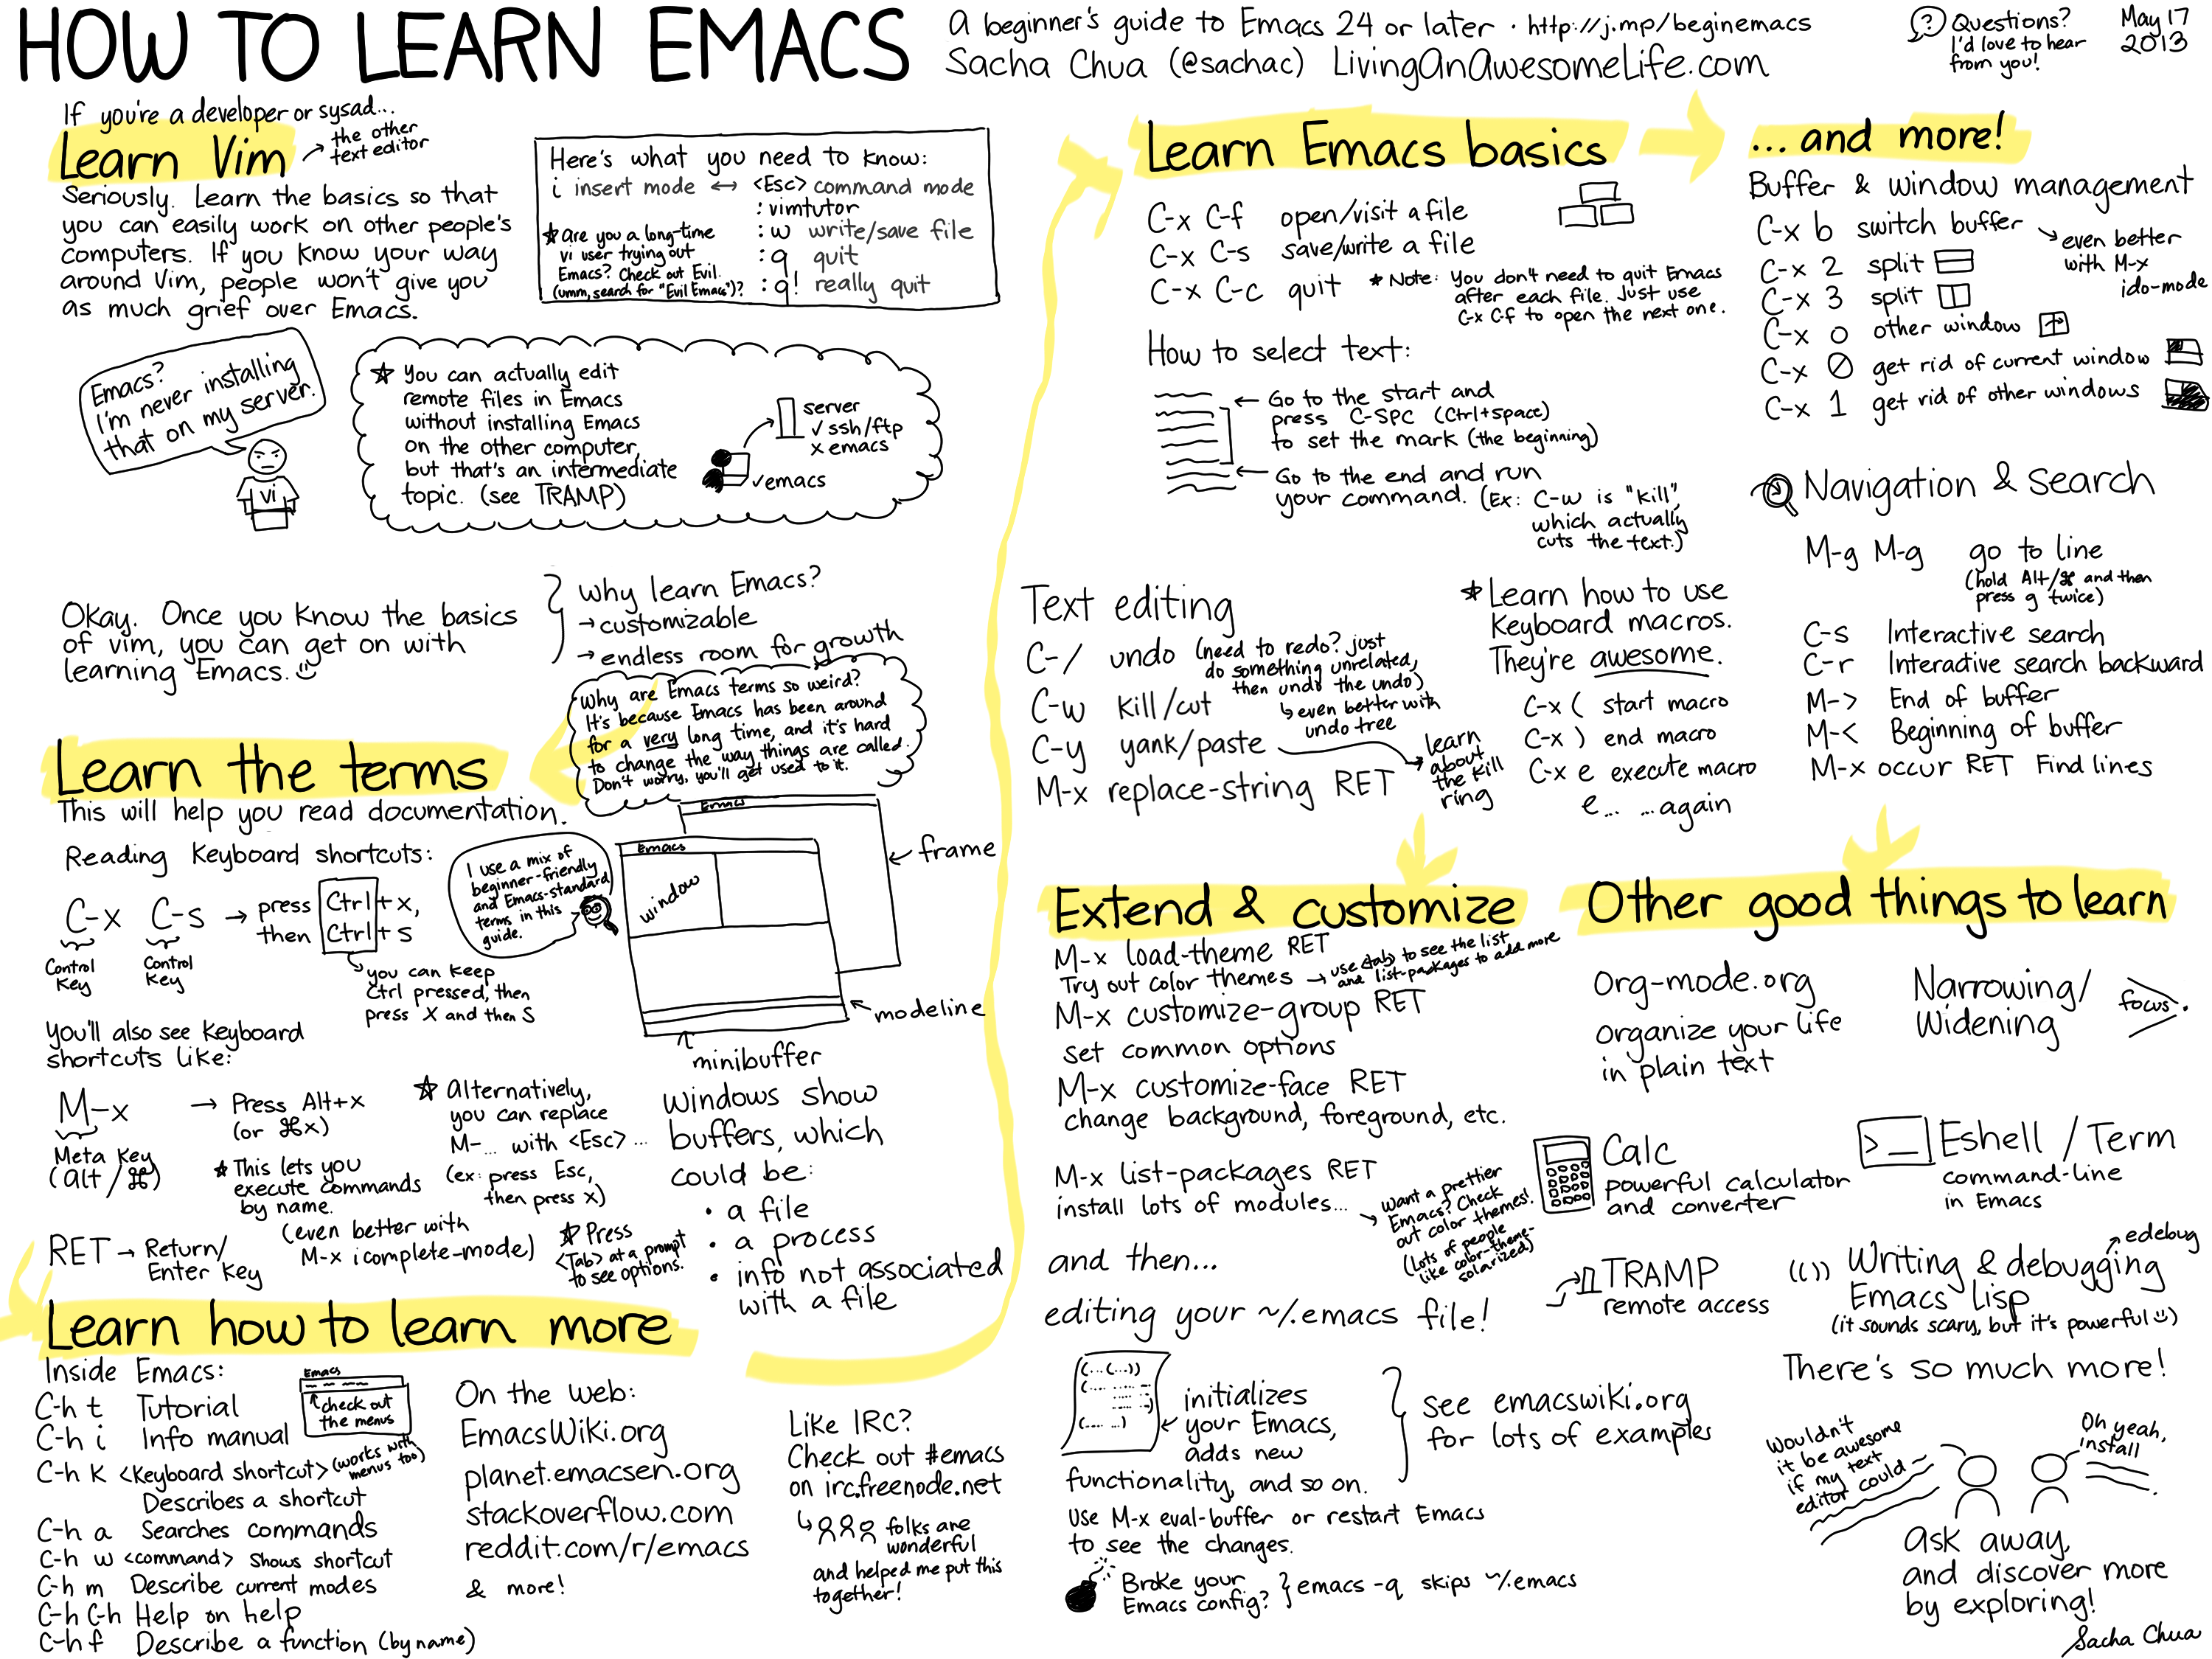 How to learn Emacs